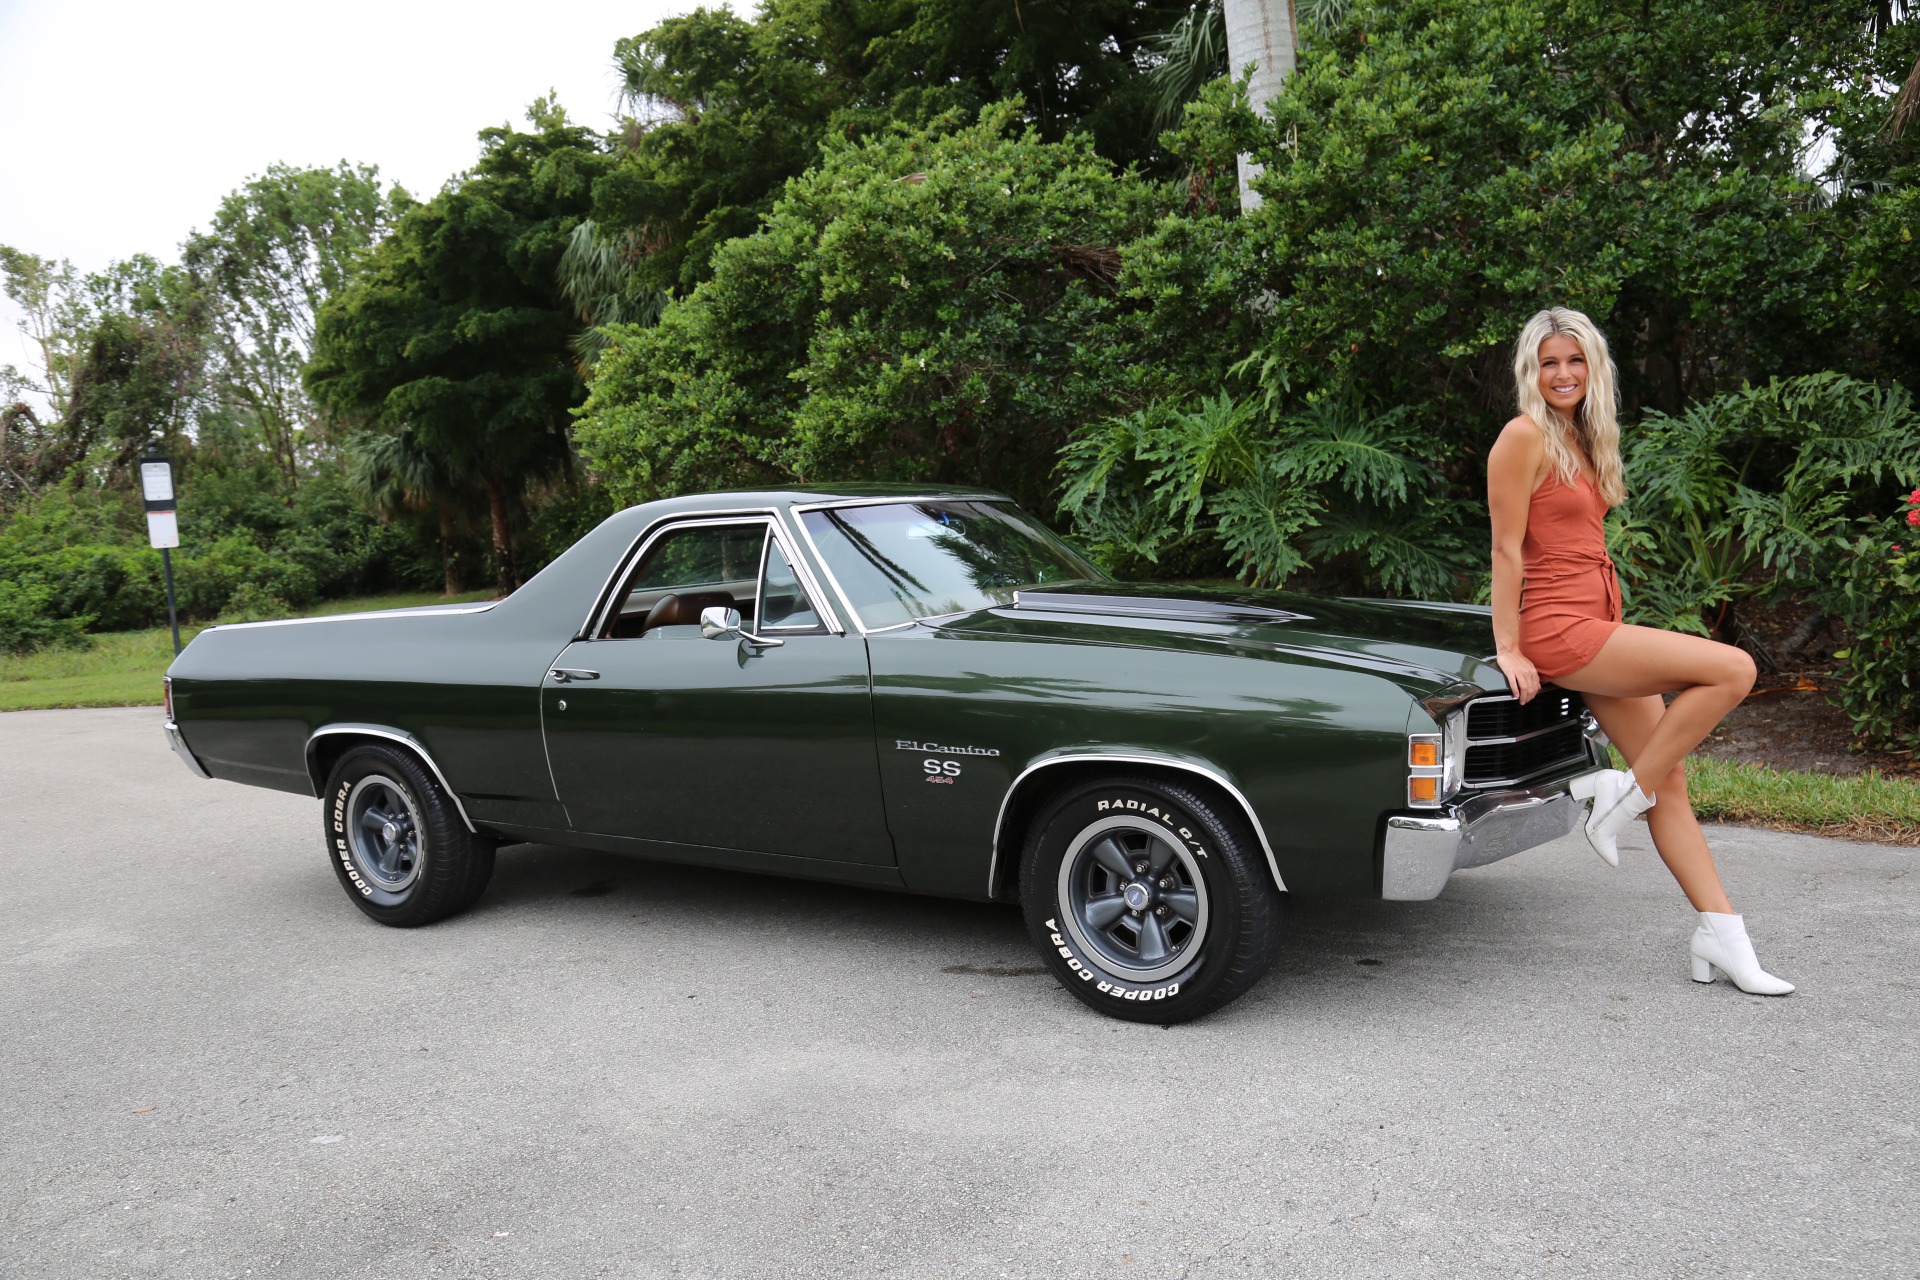 Used 1971 Chevrolet ElCamino SS SS Super Sport for sale Sold at Muscle Cars for Sale Inc. in Fort Myers FL 33912 3